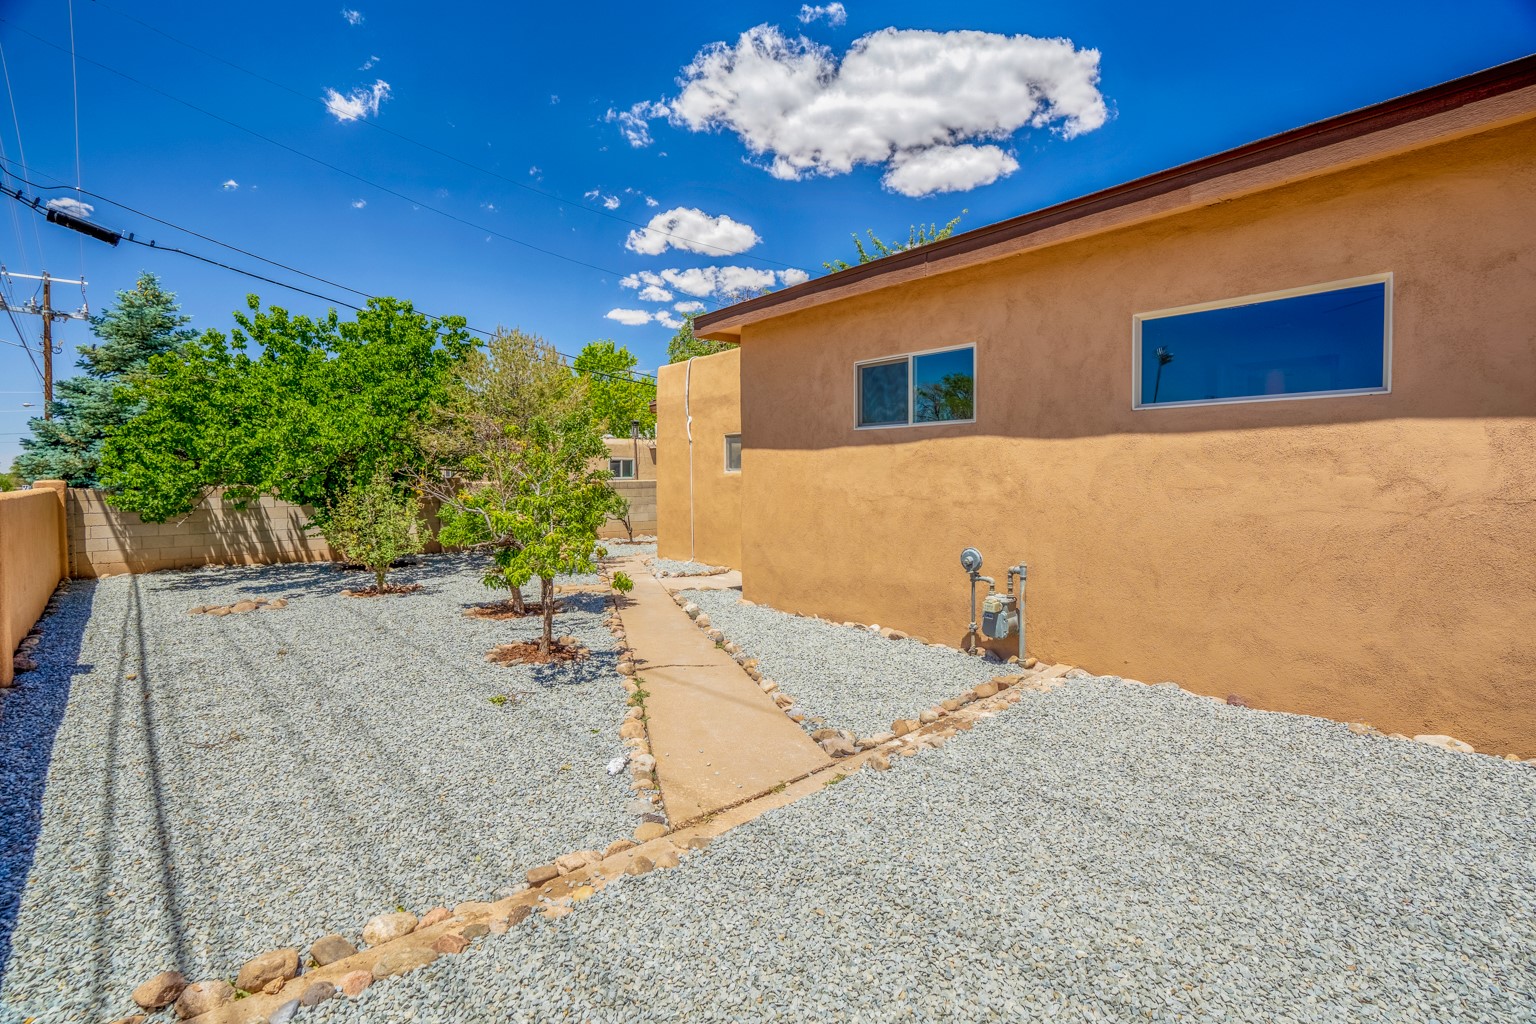 Santa Fe, New Mexico 87501, 4 Bedrooms Bedrooms, ,3 BathroomsBathrooms,Residential Lease,For Rent,202232145